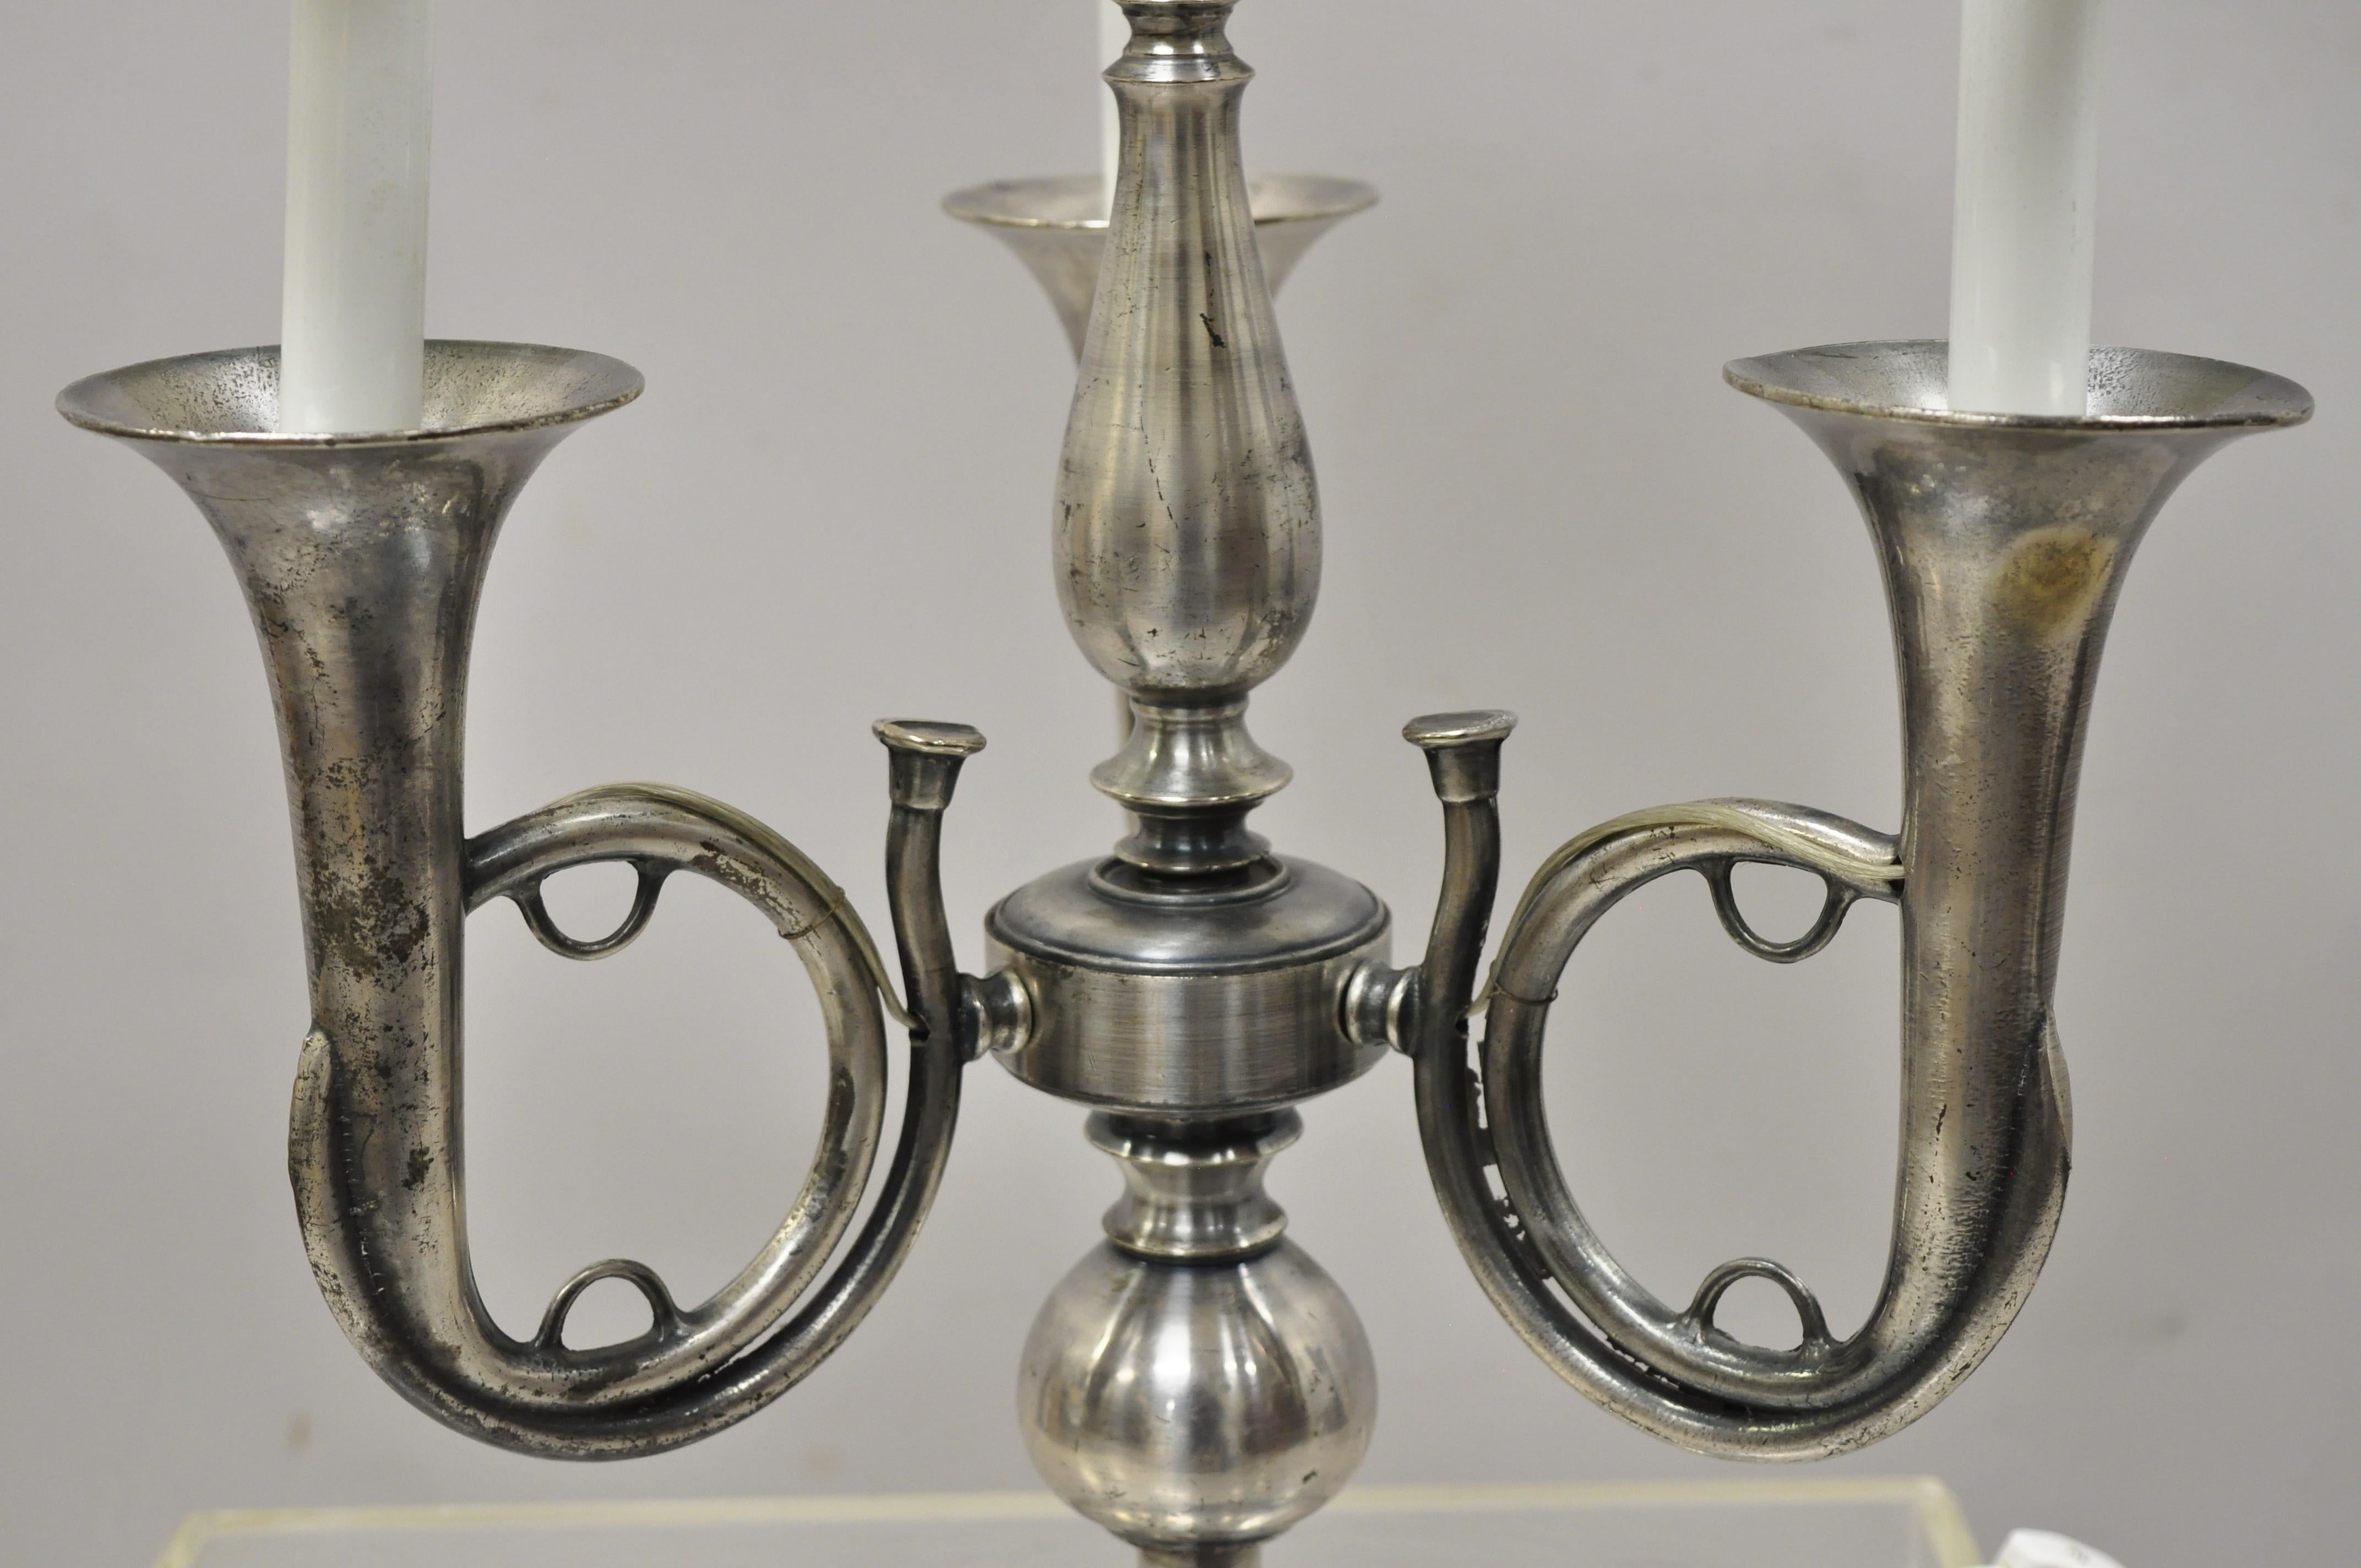 Antique French Empire Trumpet Arm Metal Shade Nickel-Plated Bouillotte Desk Lamp In Good Condition For Sale In Philadelphia, PA